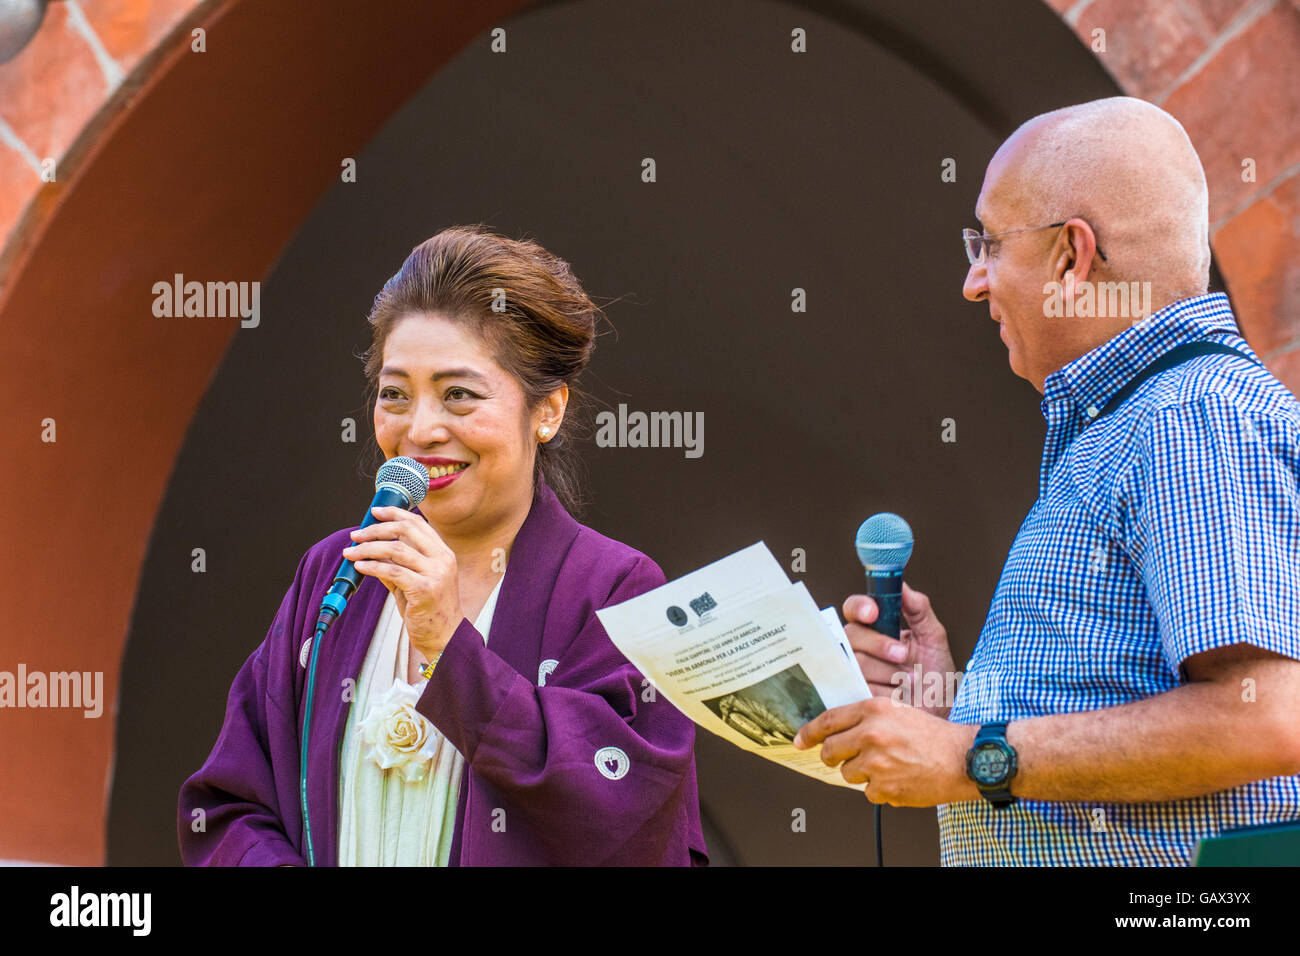 Turin, Italy. 5th July, 2016. Arsenal of Peace - Event 'Living in harmony for universal peace' - Organized by Master Paolo Spagone, the Zen School, Mizu No Oto - for the 150 years of friendship and cooperation between Italy and Japan - Japanese artists - Yoshiko Kurahara vocalist - Miyuki Ikesue which sounds of Little Harp - Shiho Yabuki pianist and expert on electronic-Takamitsu Yanaka tools vocalist, guitarist, composer and creator of the celestial sound instruments such as the lyre,  and Valter Gerbi Credit:  Realy Easy Star/Alamy Live News Stock Photo